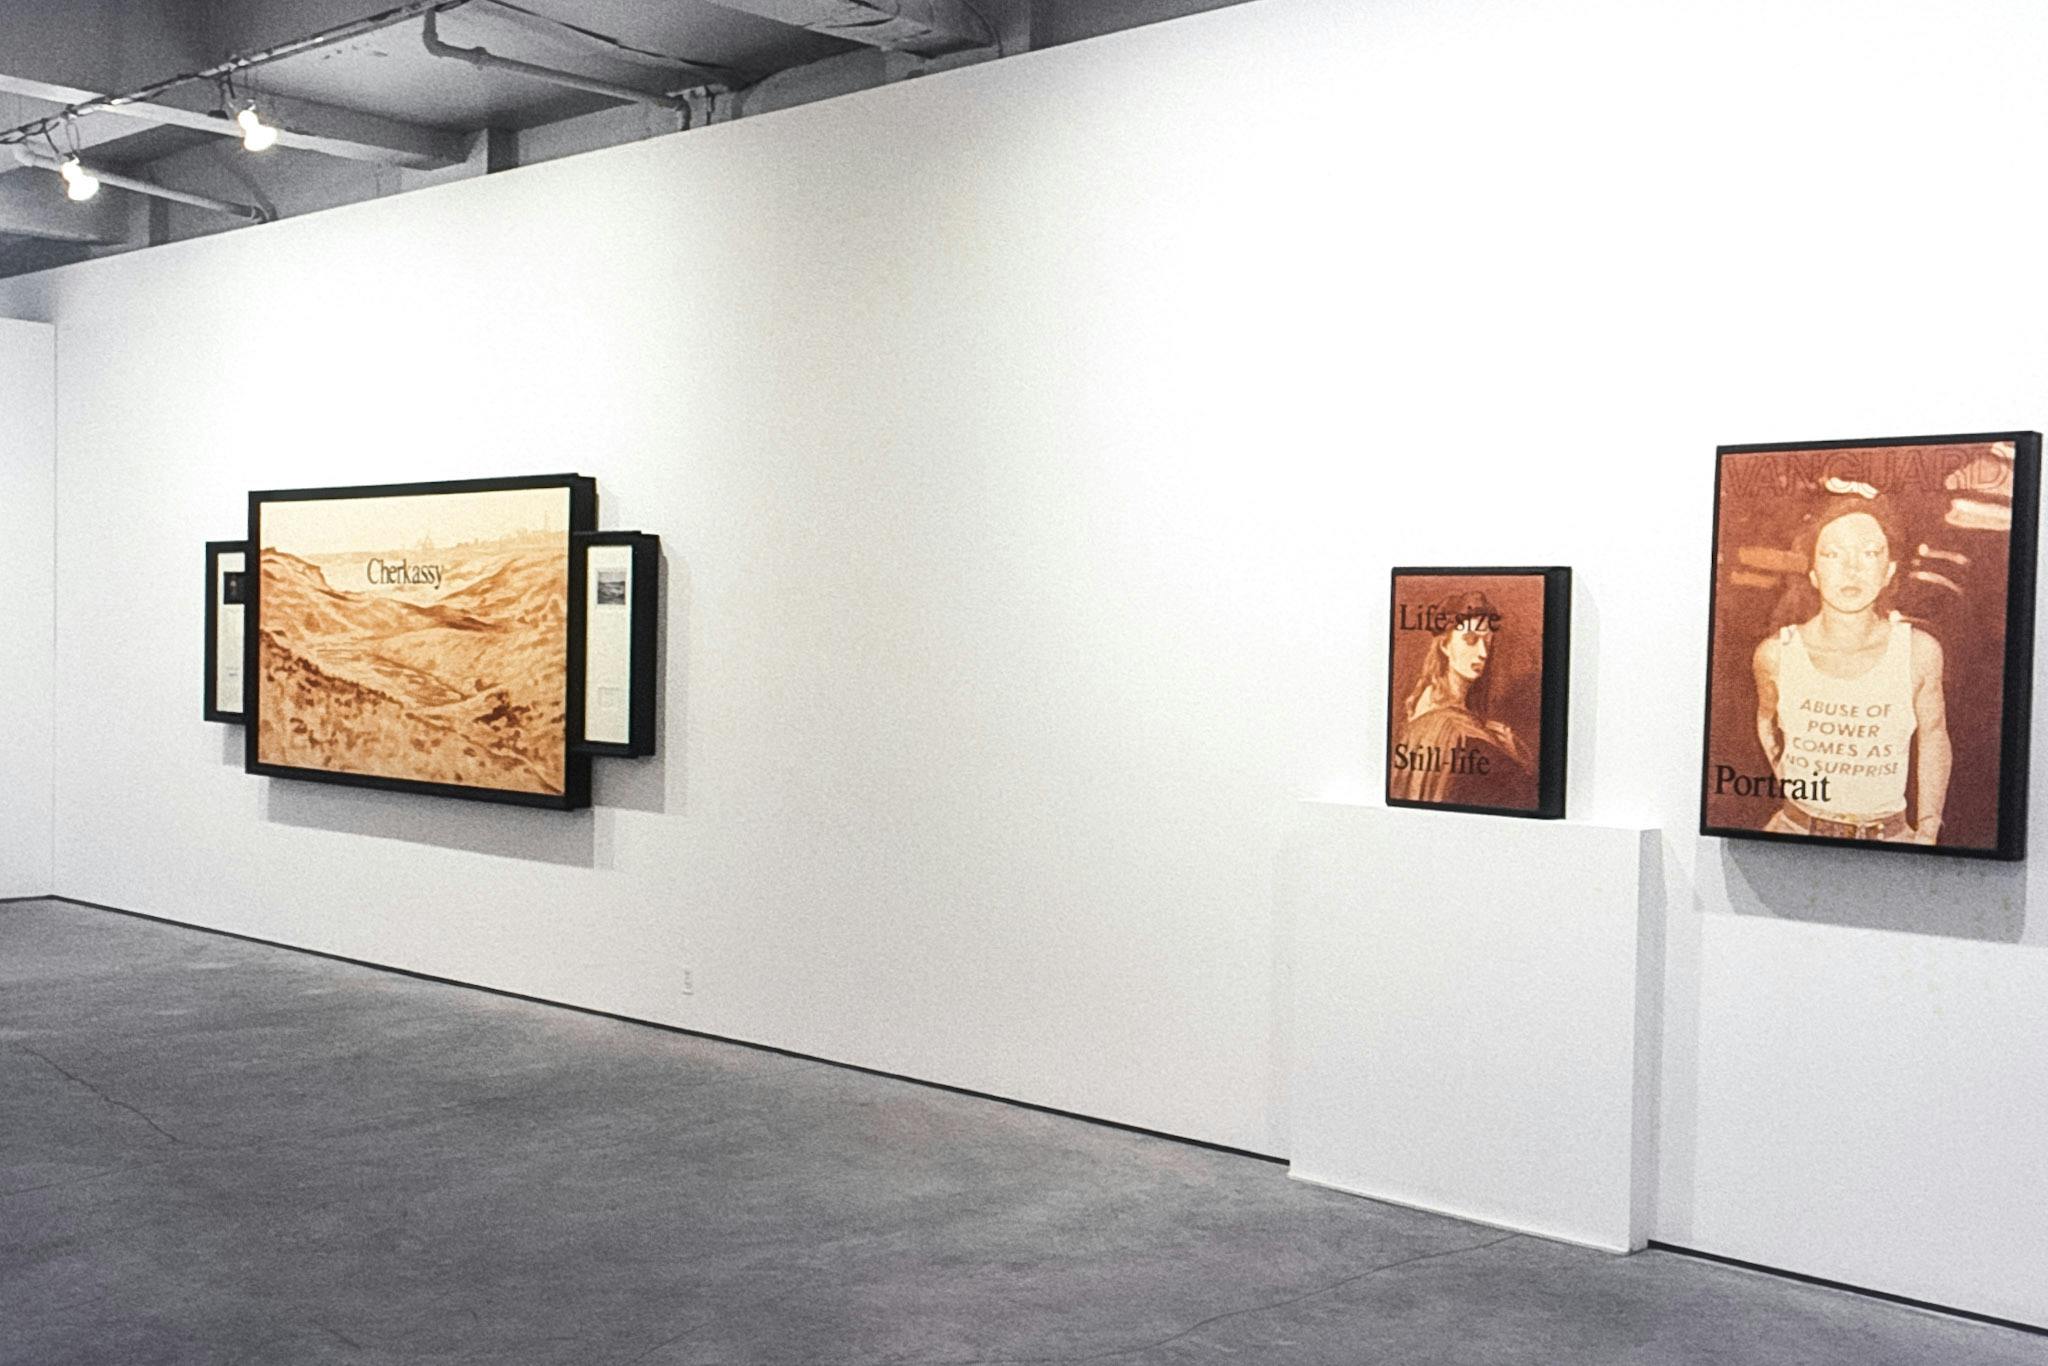 Three paintings of different sizes on a gallery wall. The paintings are all sepia-toned images with black text. The painting in the foreground shows a person standing, and the text reads "Portrait." 